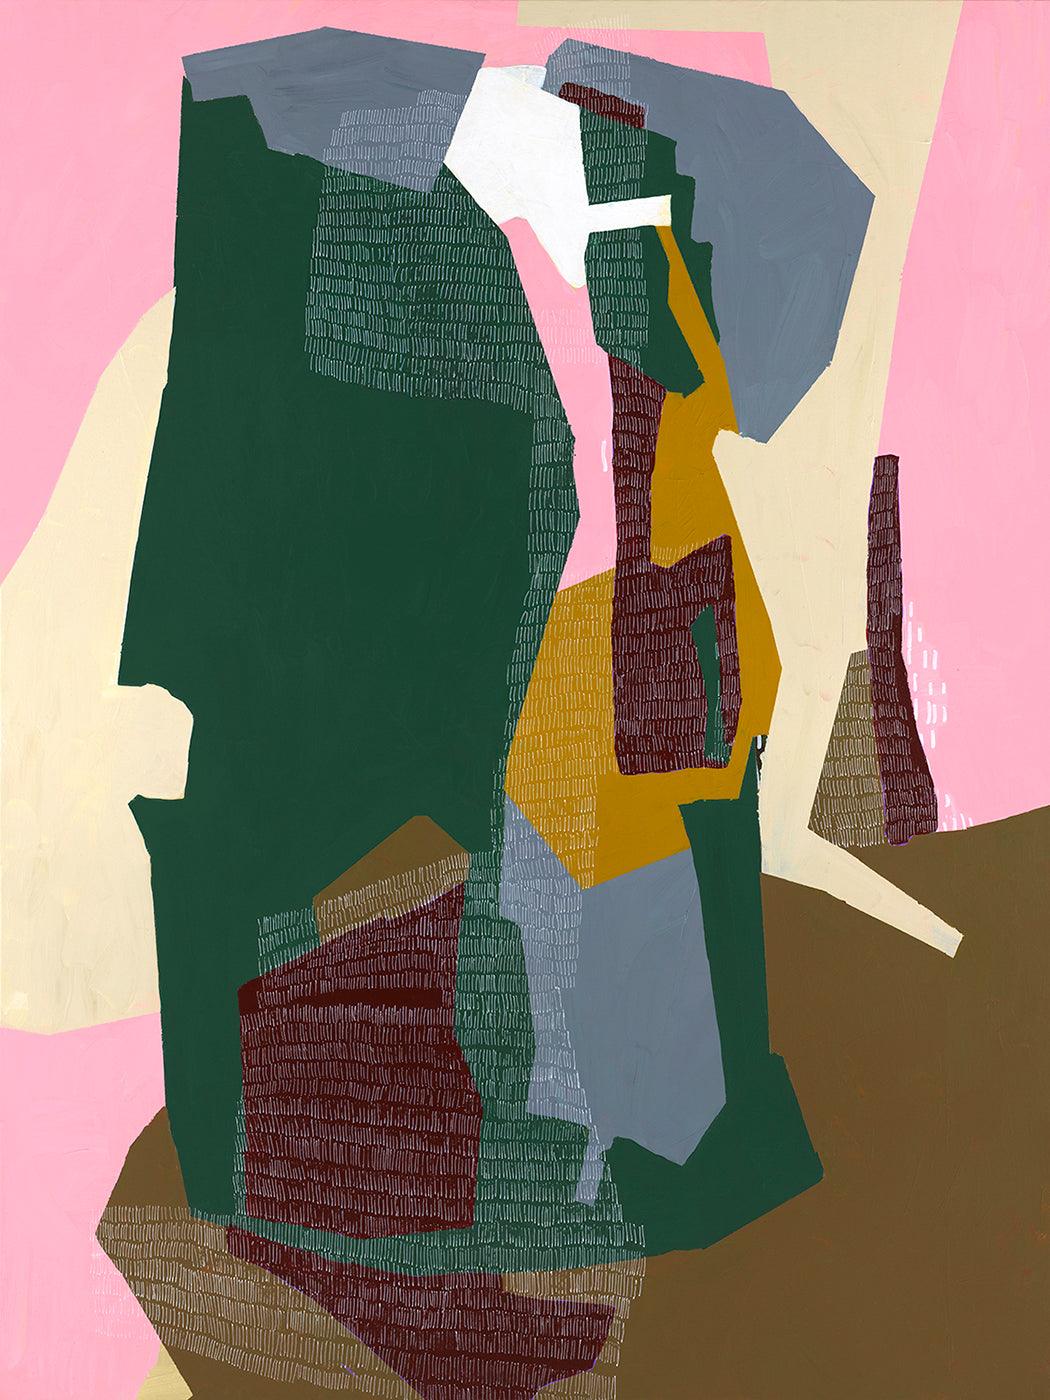 PINK/GREEN/BROWN - Duende Art Curation